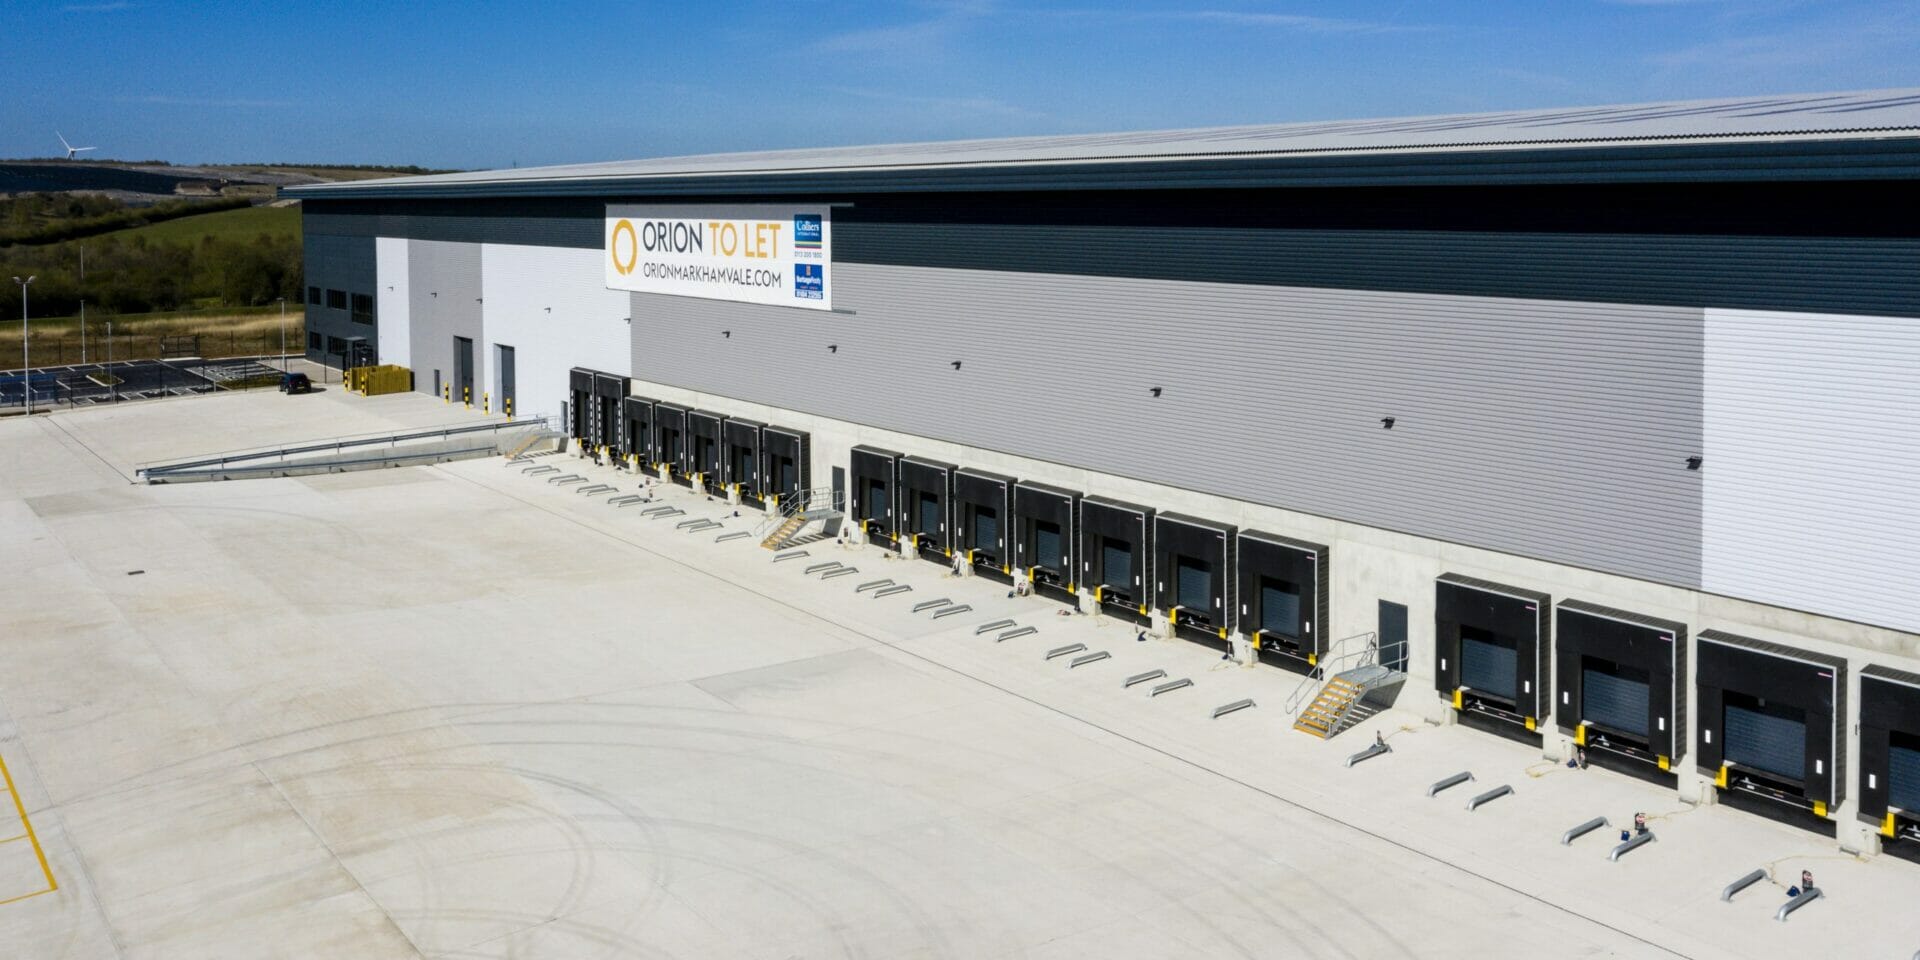 Ergo Real Estate’s £25 million high-spec logistics hub in Markham Vale North is now ready to occupy. @Ergorealestate